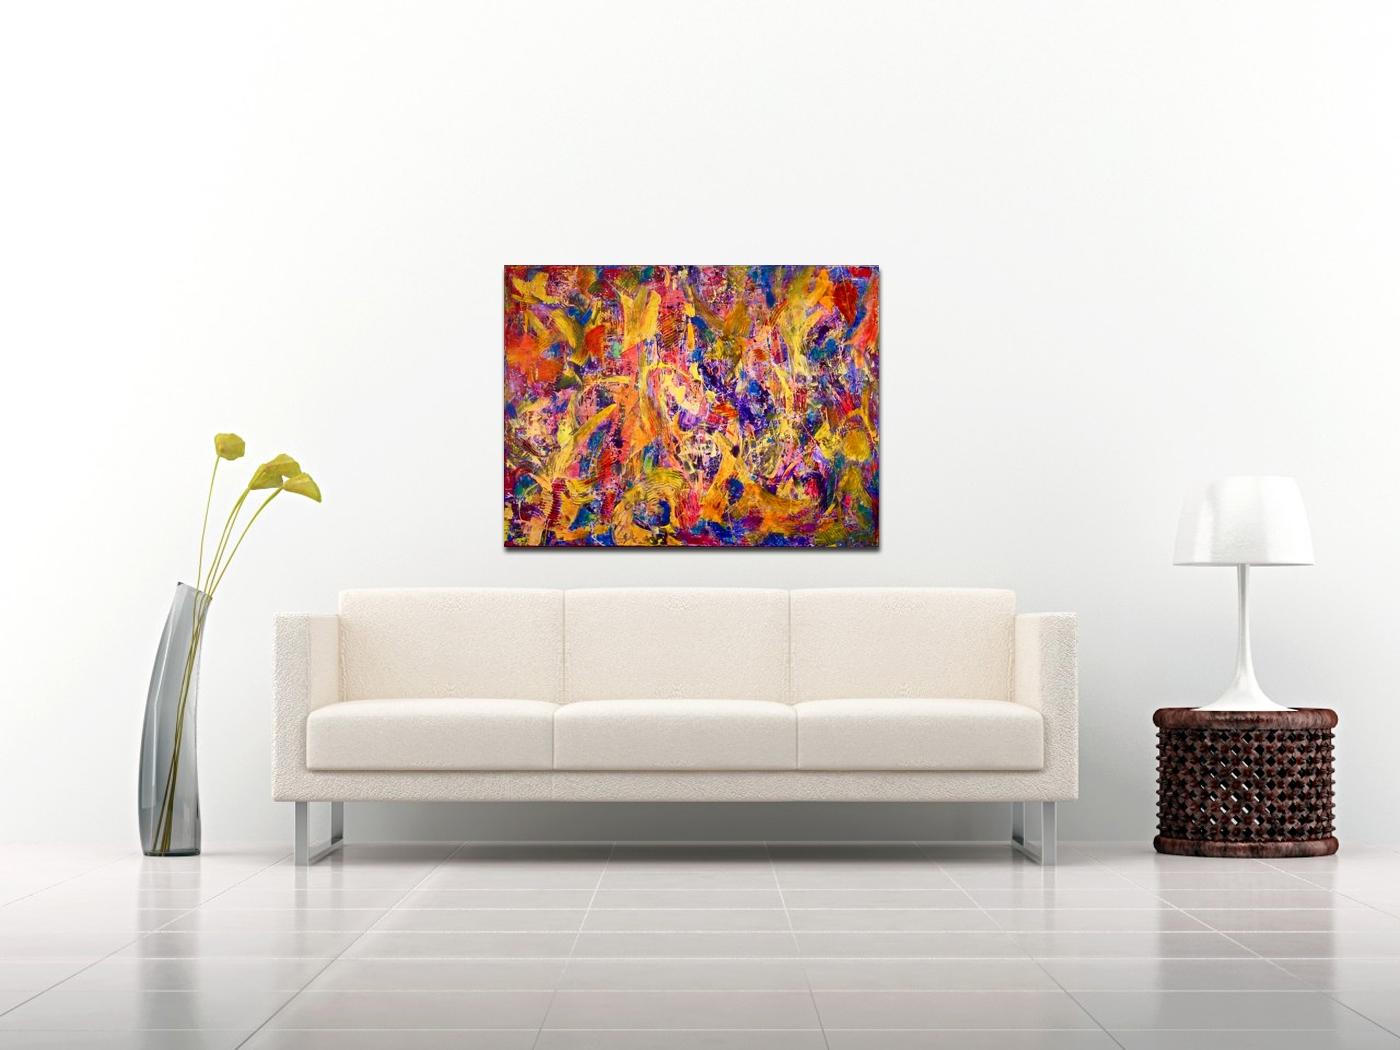 Vibrant piece with bold color blending, drips and big palette knife strokes. This painting conveys motion and energy as well as lots of light and fast changes in contrast. Reminds me of a windy summer afternoon. triple primed canvas and heavy